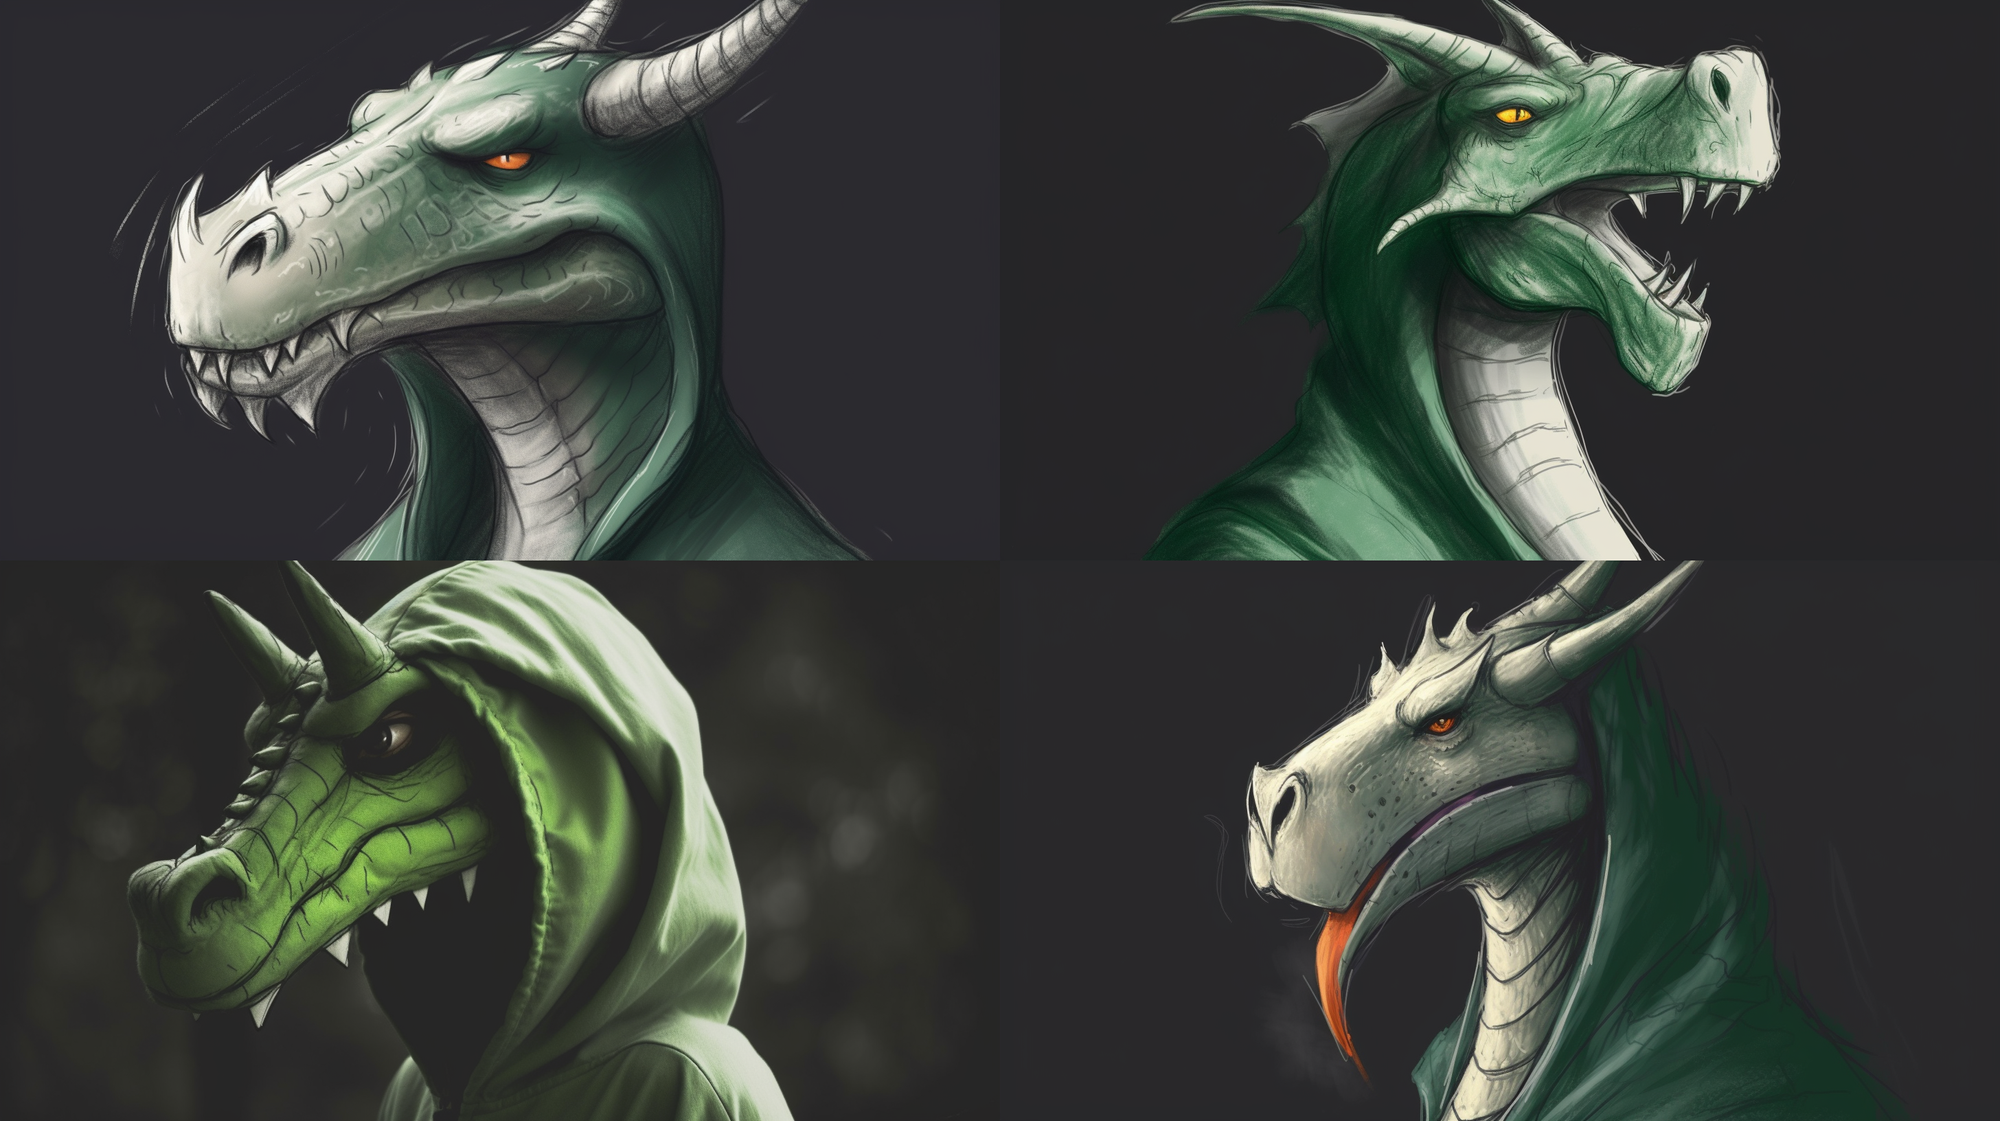 Four sketches of dragons in hoods